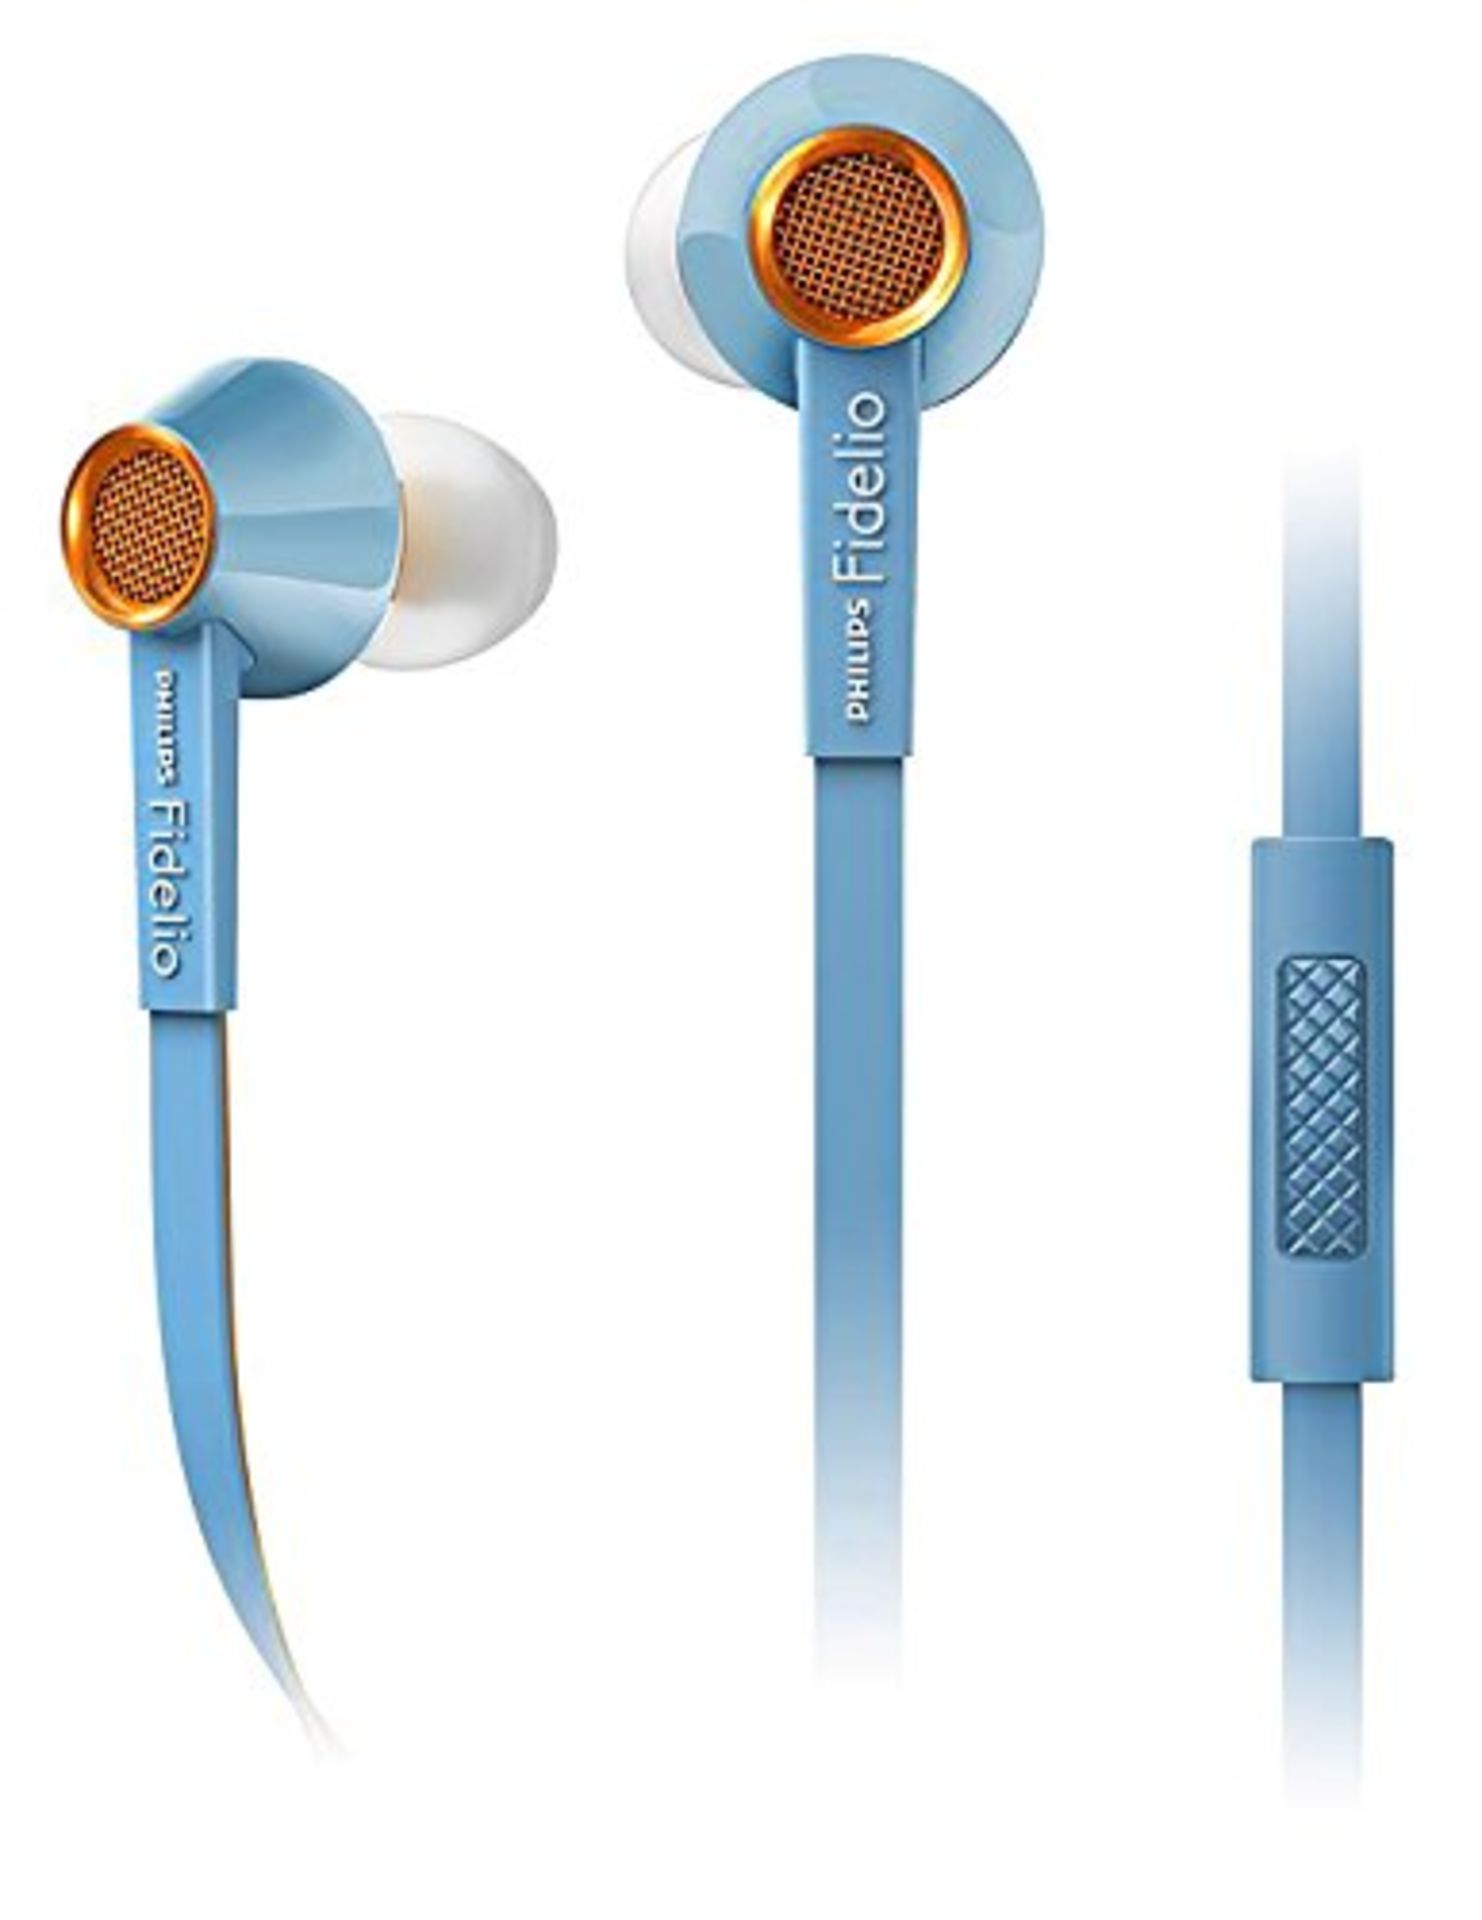 V *TRADE QTY* Brand New Philips Fidelio In-Ear Headphones With Mic S2LB/00 - In Line Remote/